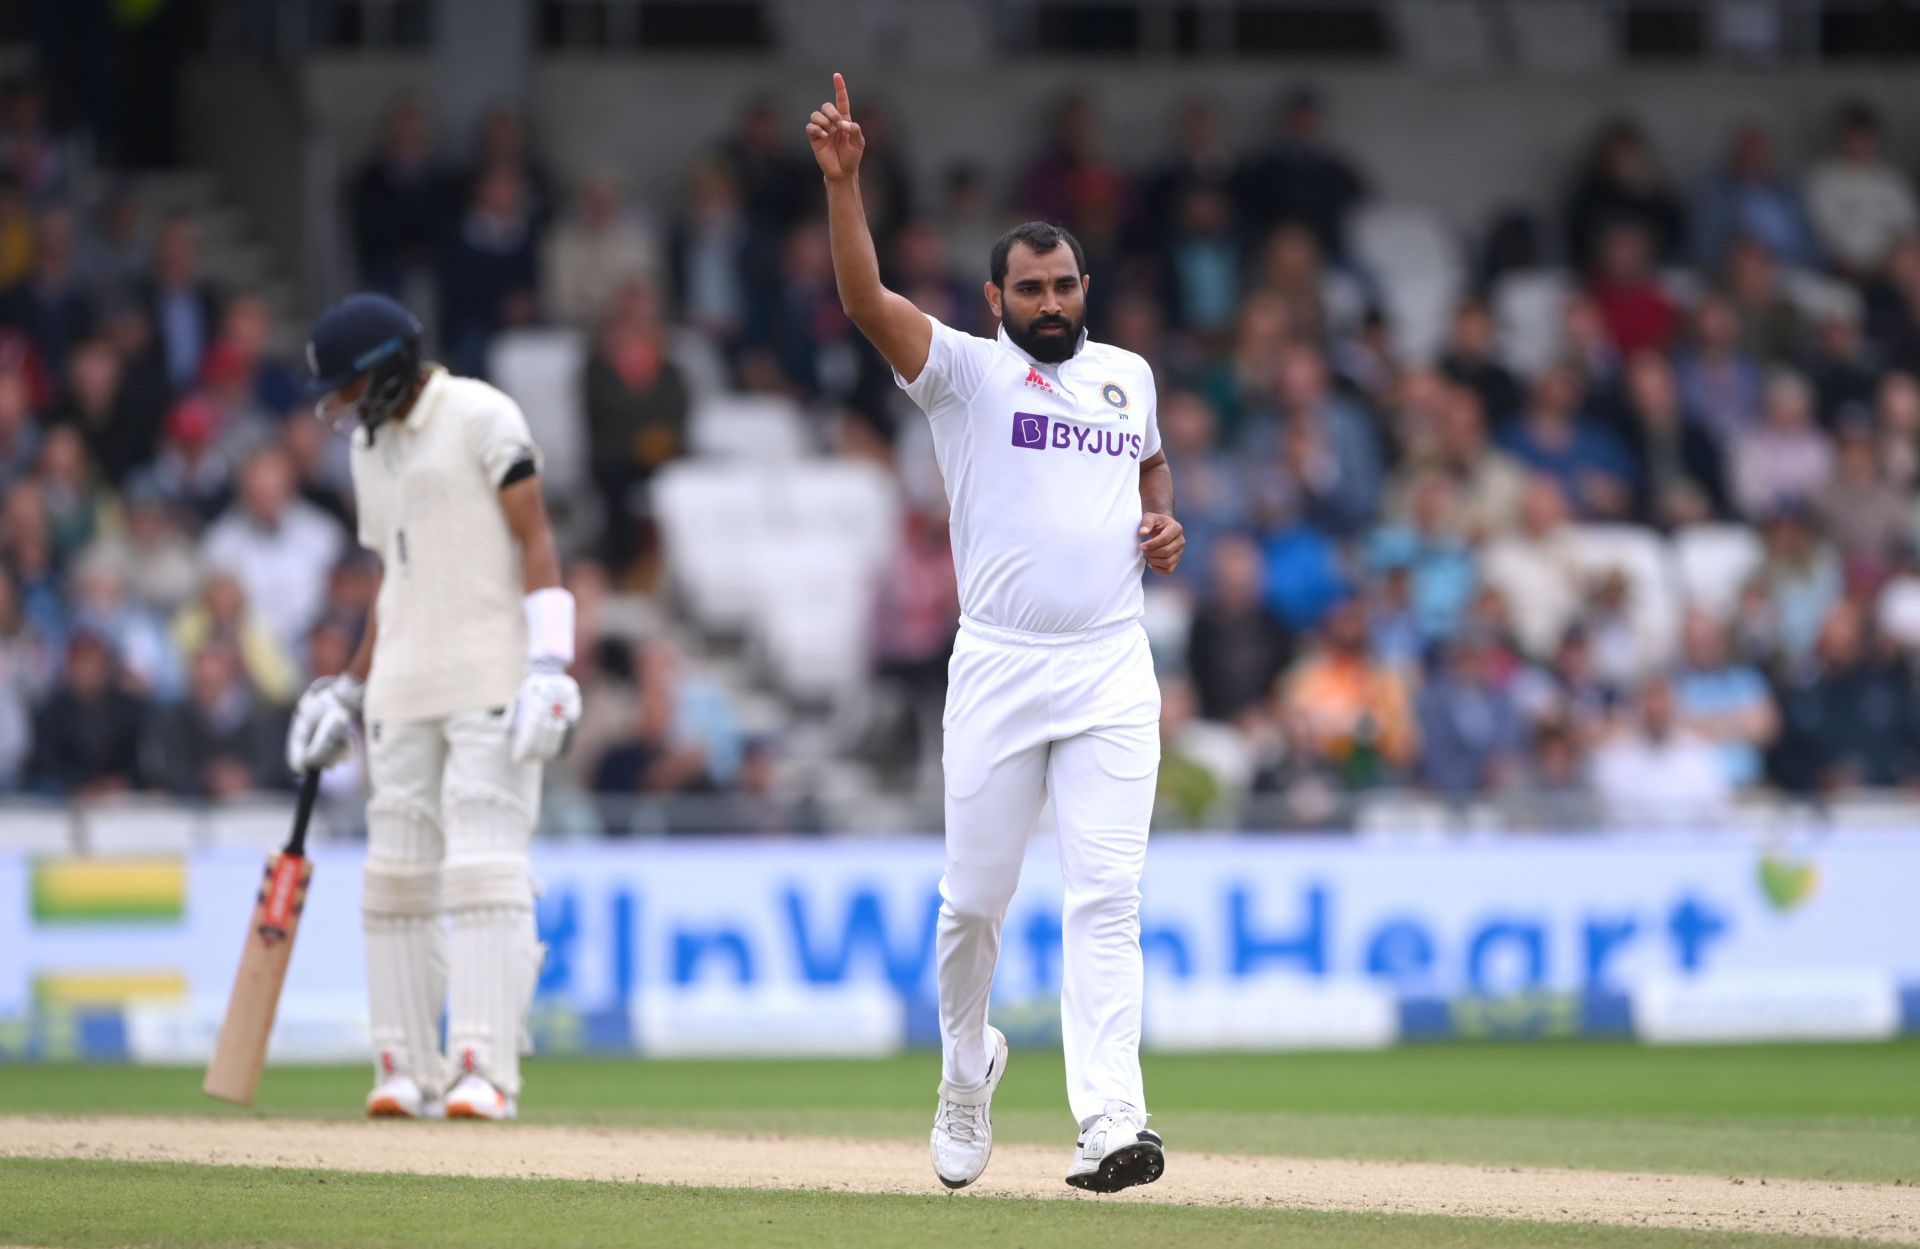 Mohammad Shami averages a below-par 40.52 with the ball in 13 Tests on English soil.